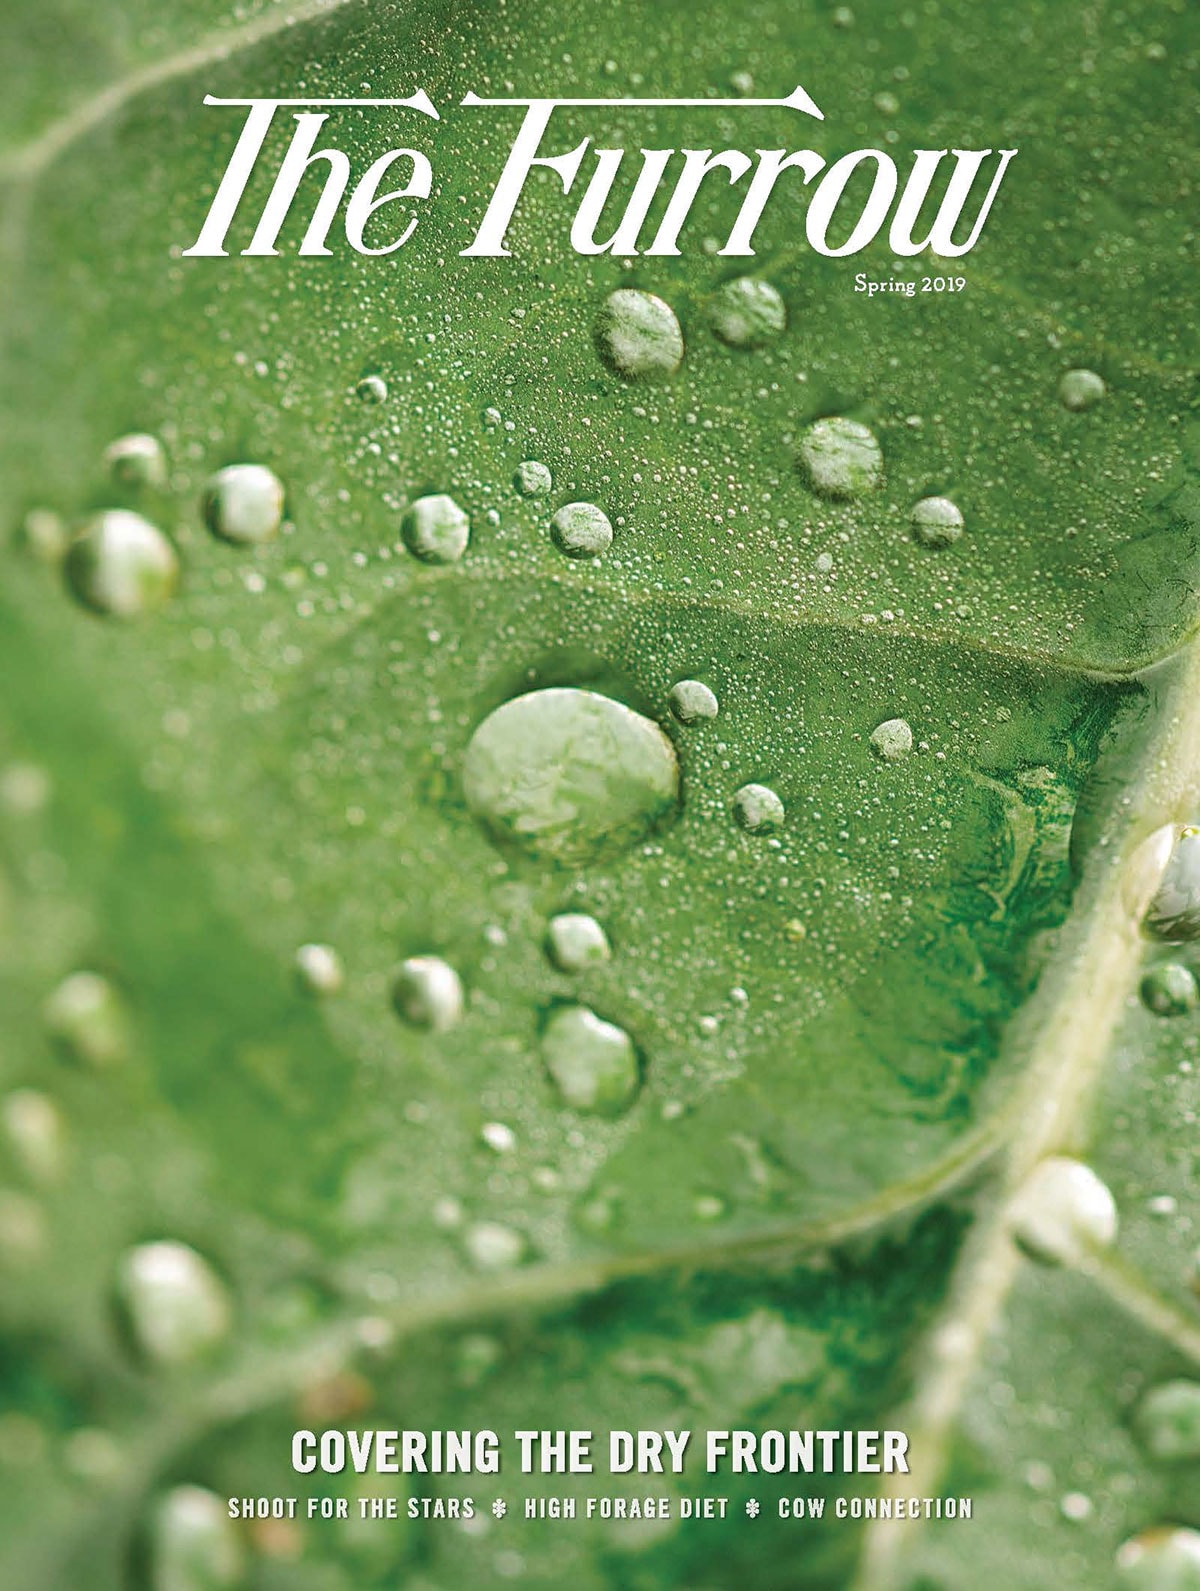 The Furrow - Spring 2019 Issue